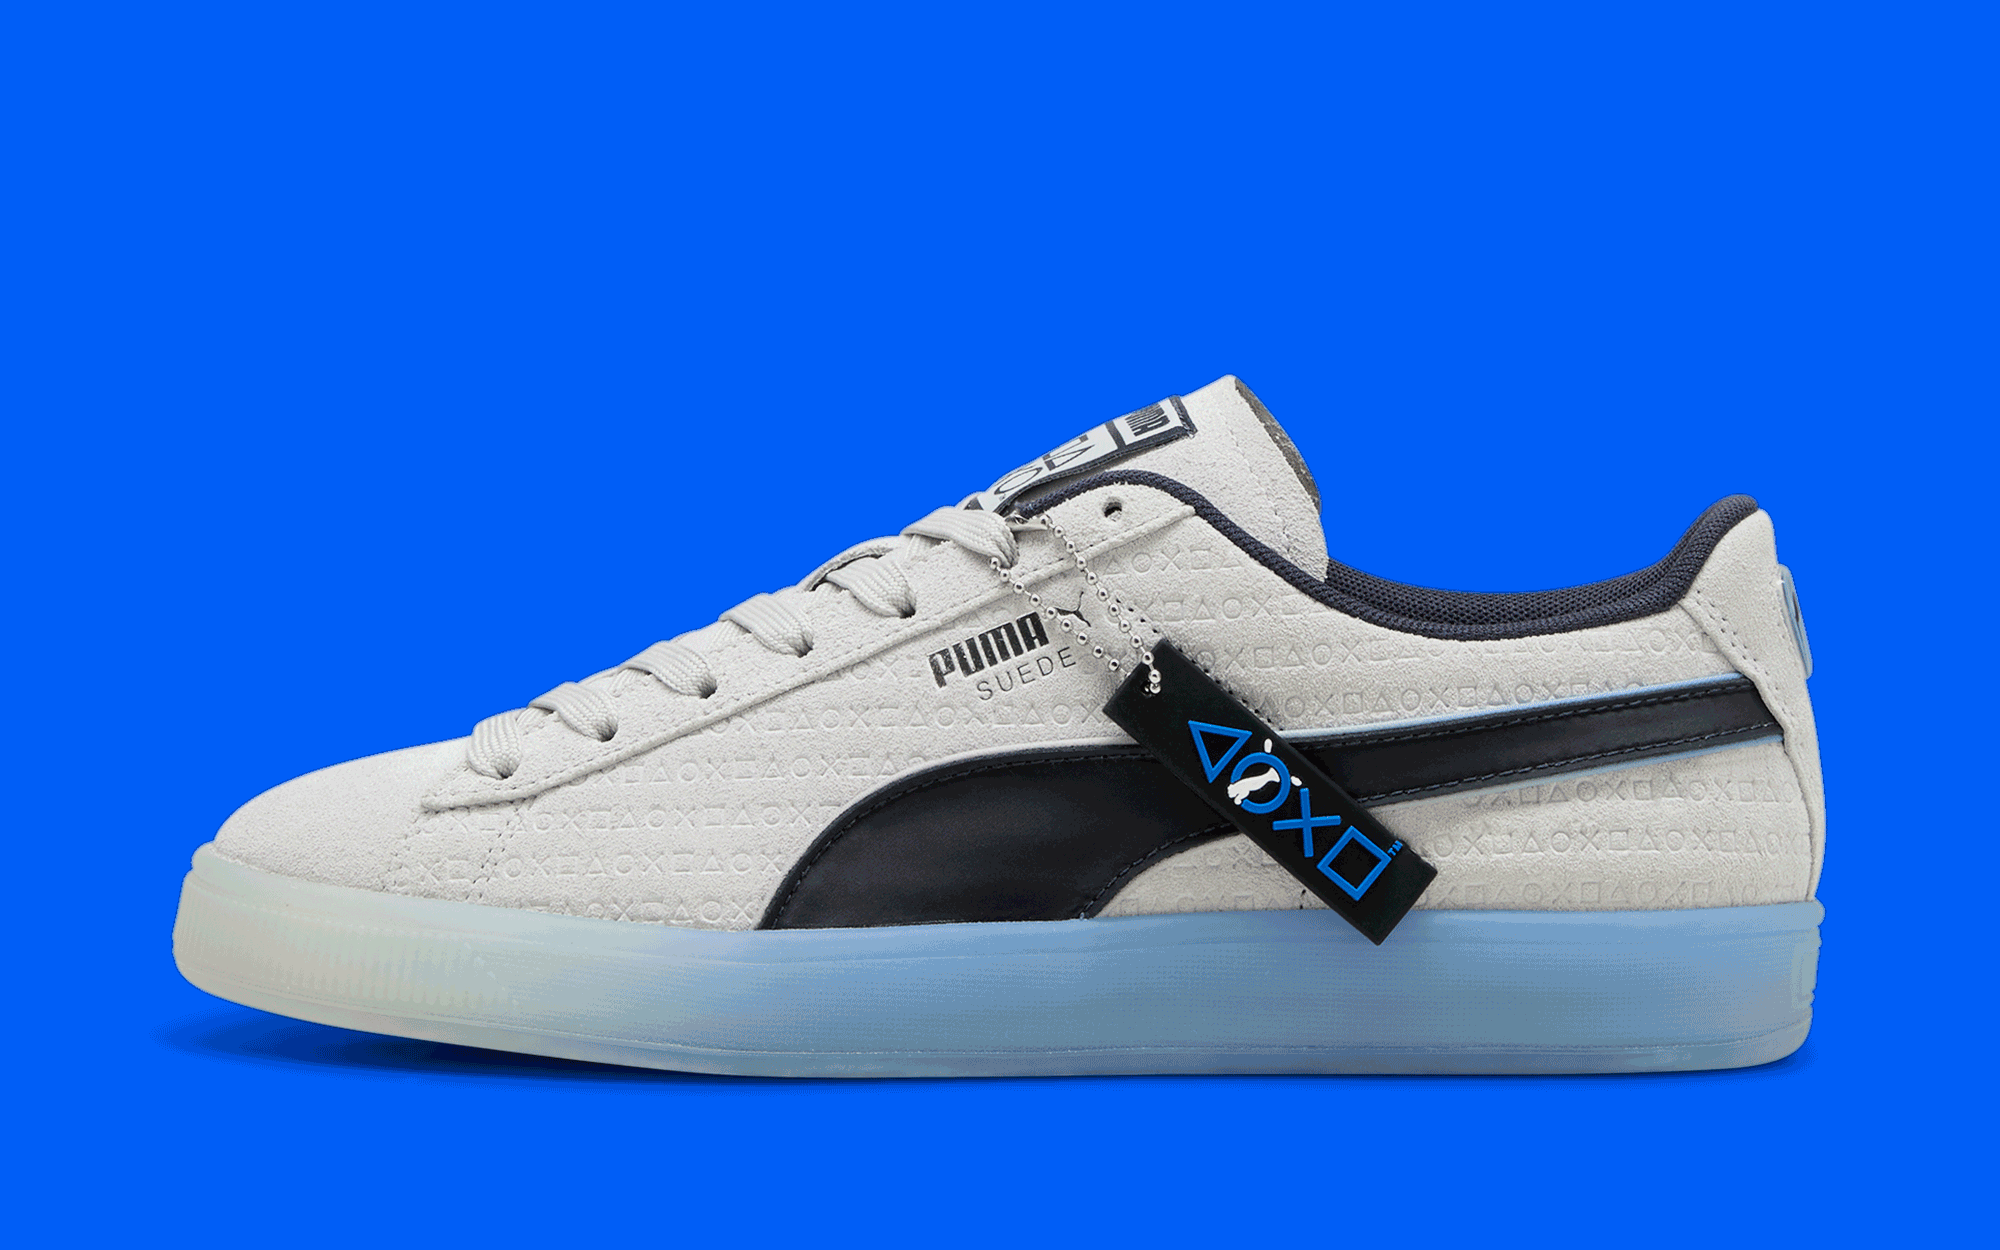 Where to Buy the Puma x PlayStation Collection